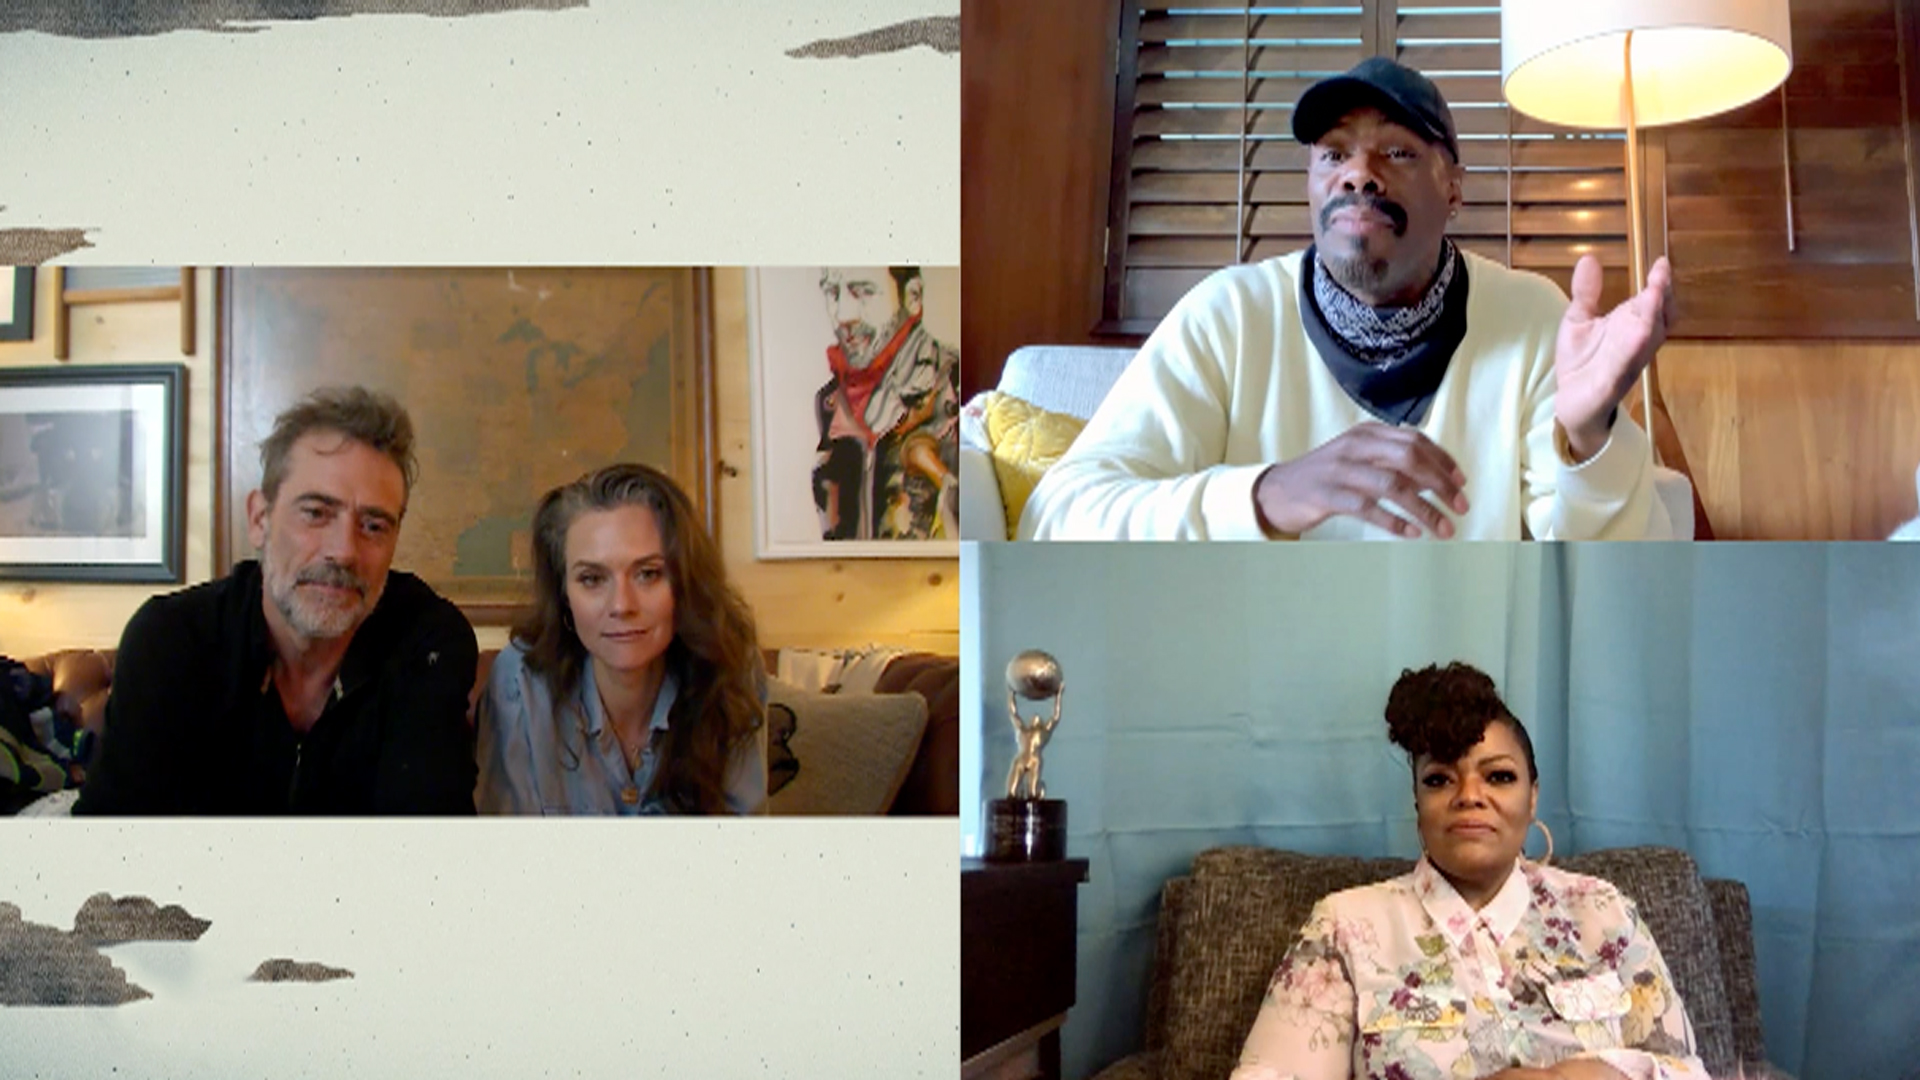 Friday Night In With the Morgans Episode 9 Bonus Segment: Continuing the Anti-Racism Conversation, Colman Domingo and Yvette Nicole Brown share what films, documentaries, television shows and more people can engage with to inform and support anti-racist activism.